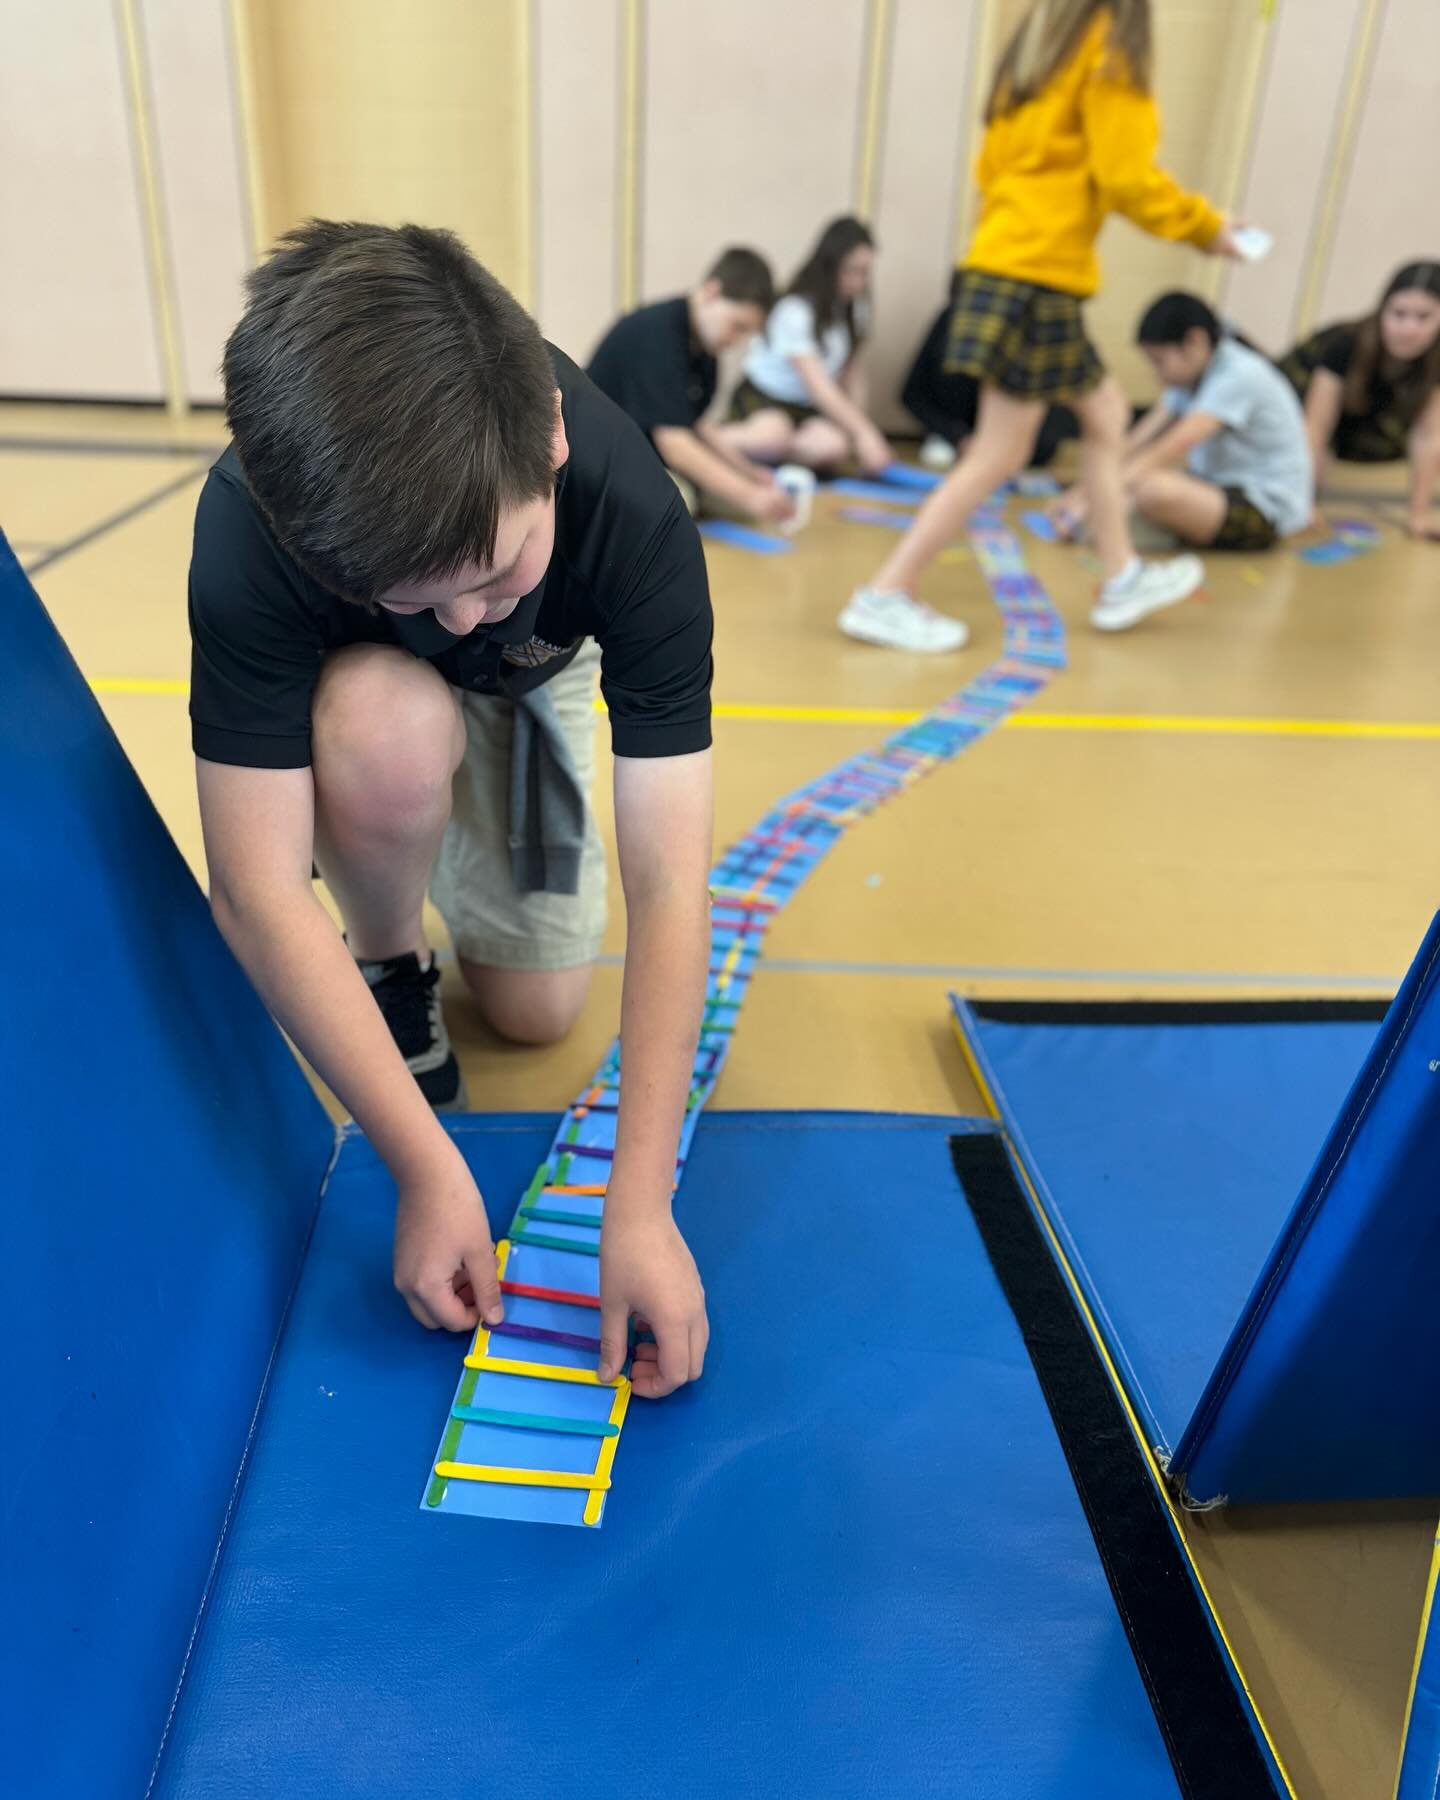 The 5th graders reenacted building  The Transcontinental Railroad in history class today! Students were divided into The Central Pacific and Union Pacific Railroad Companies, and they worked together to race to Promontory Point, Utah. They even &ldqu